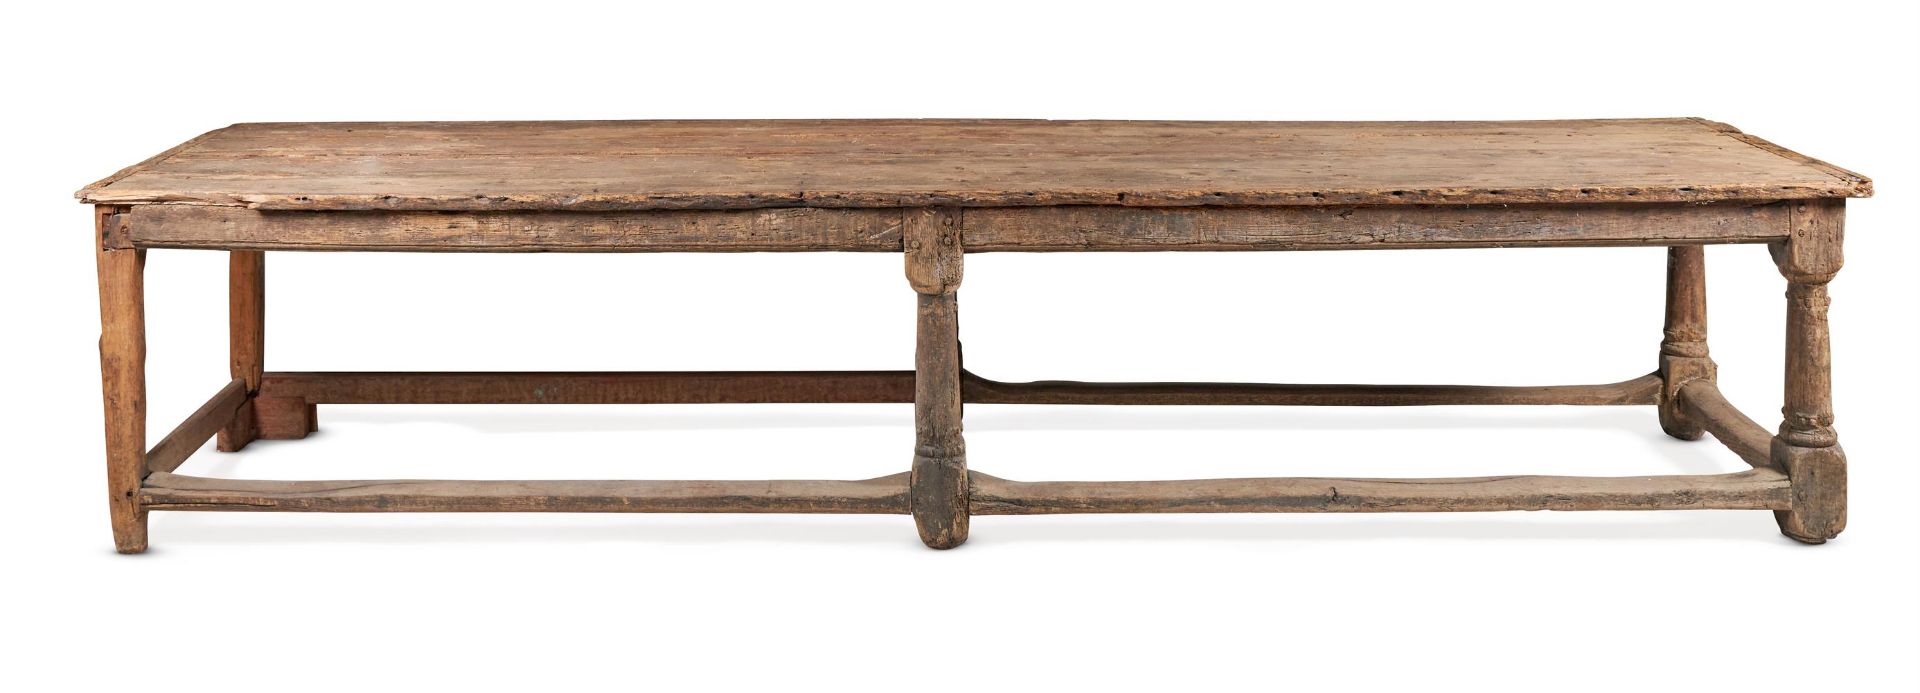 A PINE REFECTORY TABLE, 17TH CENTURY